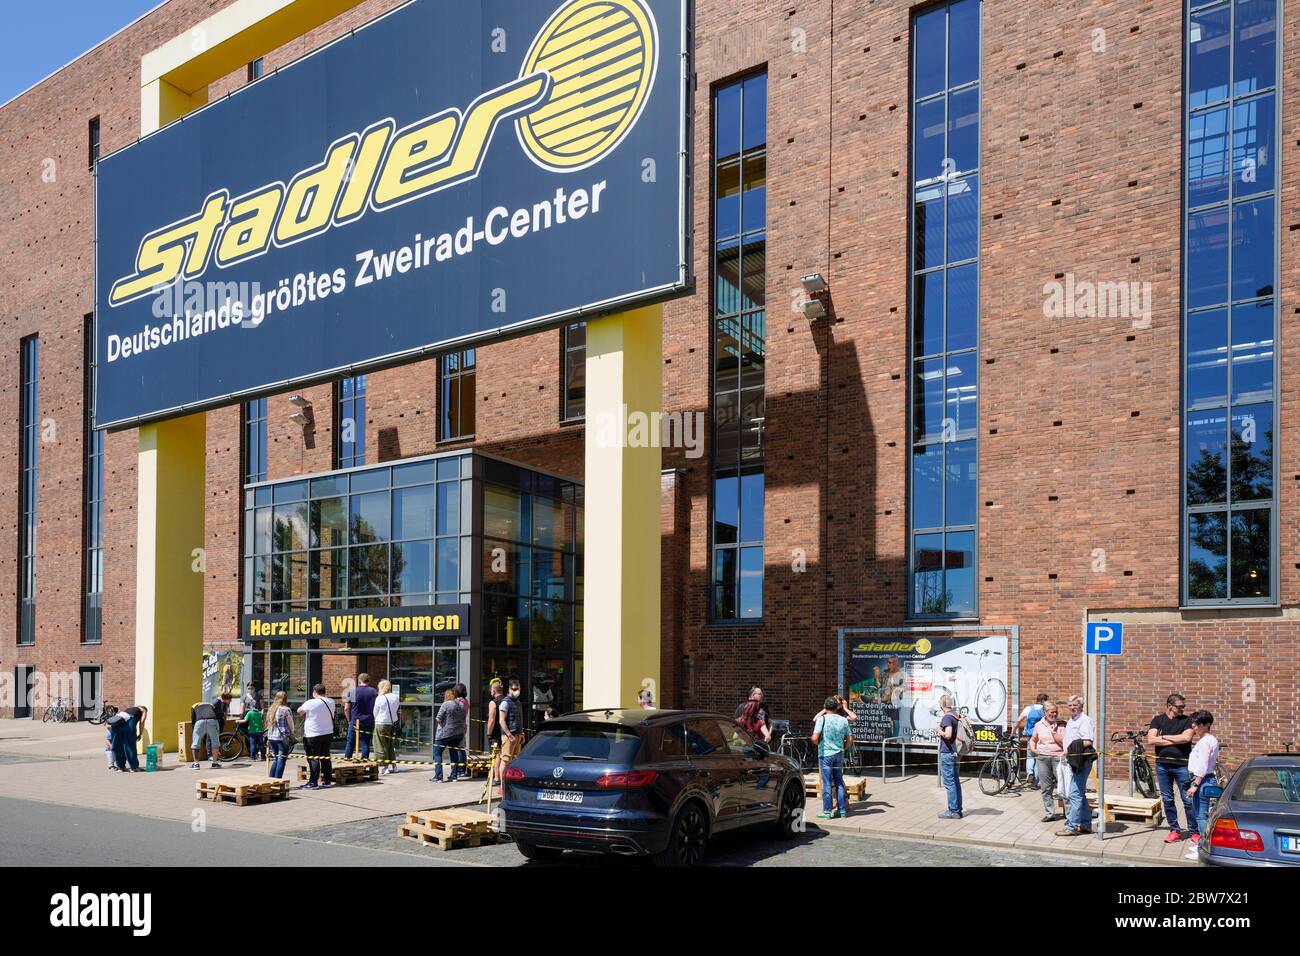 Hanover, Germany, May 30, 2020: Bicycle boom in the Corona crisis. Queues  in front of bicycle store Stadler, the largest bicycle center in Germany.  --- Hannover, 30.05.2020: Fahrradboom in der Corona-Krise. Warteschlangen